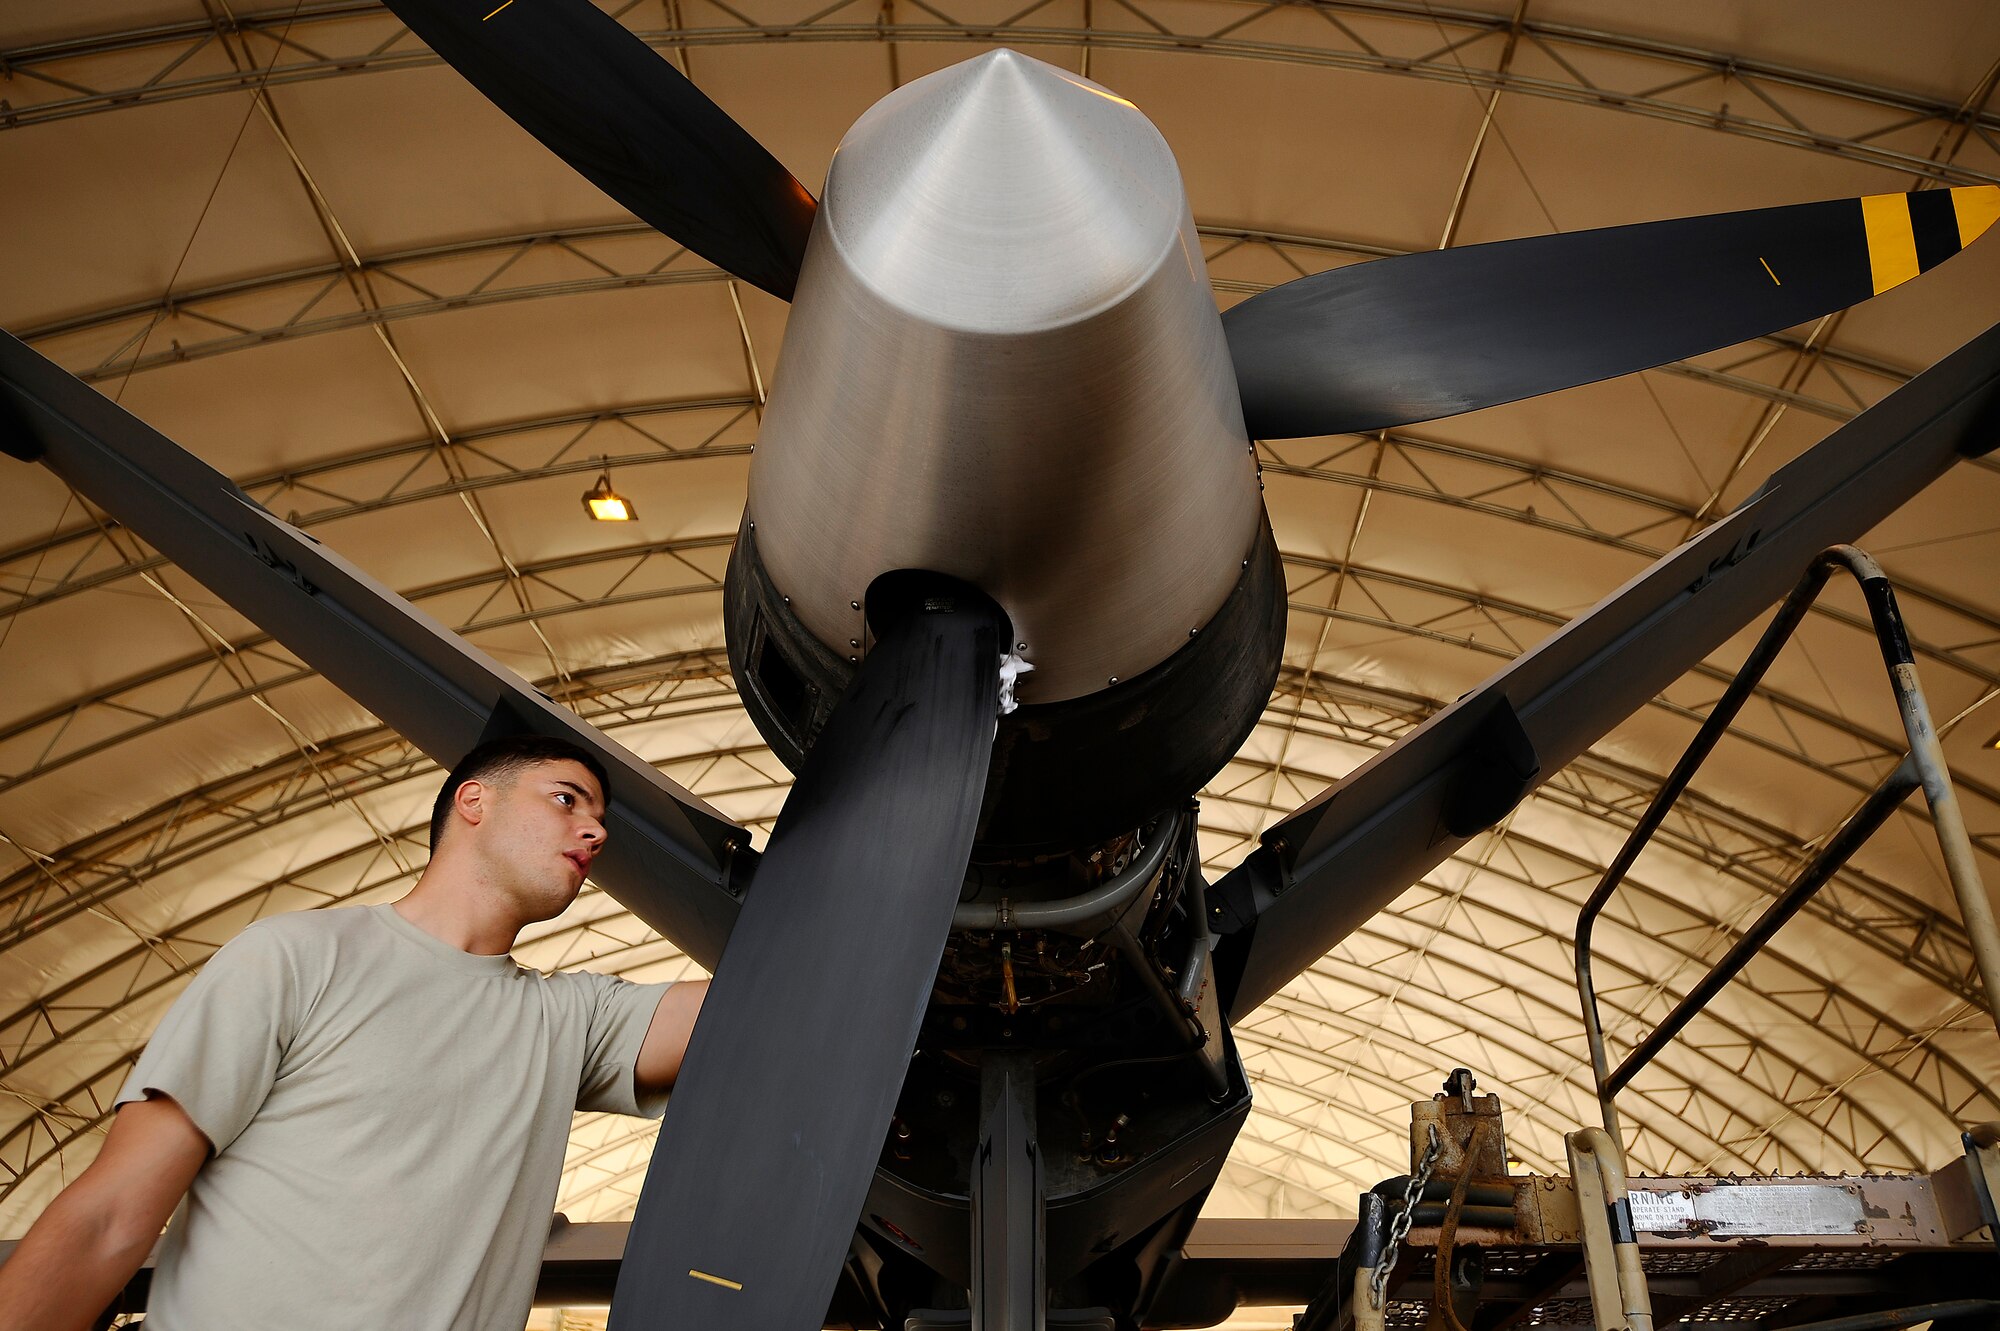 Senior Airman Hector Sanchez wipes carbon build up off the propeller of an MQ-9 Reaper at Joint Base Balad, Iraq, Nov. 22. Carbon builds on the propeller from the Reaper's exhaust. A coalition force of experts from the U.S. Air Force and Royal Air Force deployed here to man a new Reaper aircraft maintenance unit. The unit is attached to the 46th Expeditionary Reconnaissance and Attack Squadron and assumed maintenance duties from General Atomics, which produces the Reaper for these services. Sanchez, a Reaper crew chief assigned to the 332nd Expeditionary Aircraft Maintenance Squadron, is deployed from Creech Air Force Base, Nev. His hometown is Utuado, Puerto Rico. (U.S. Air Force photo/Airman 1st Class Jason Epley)(Released)